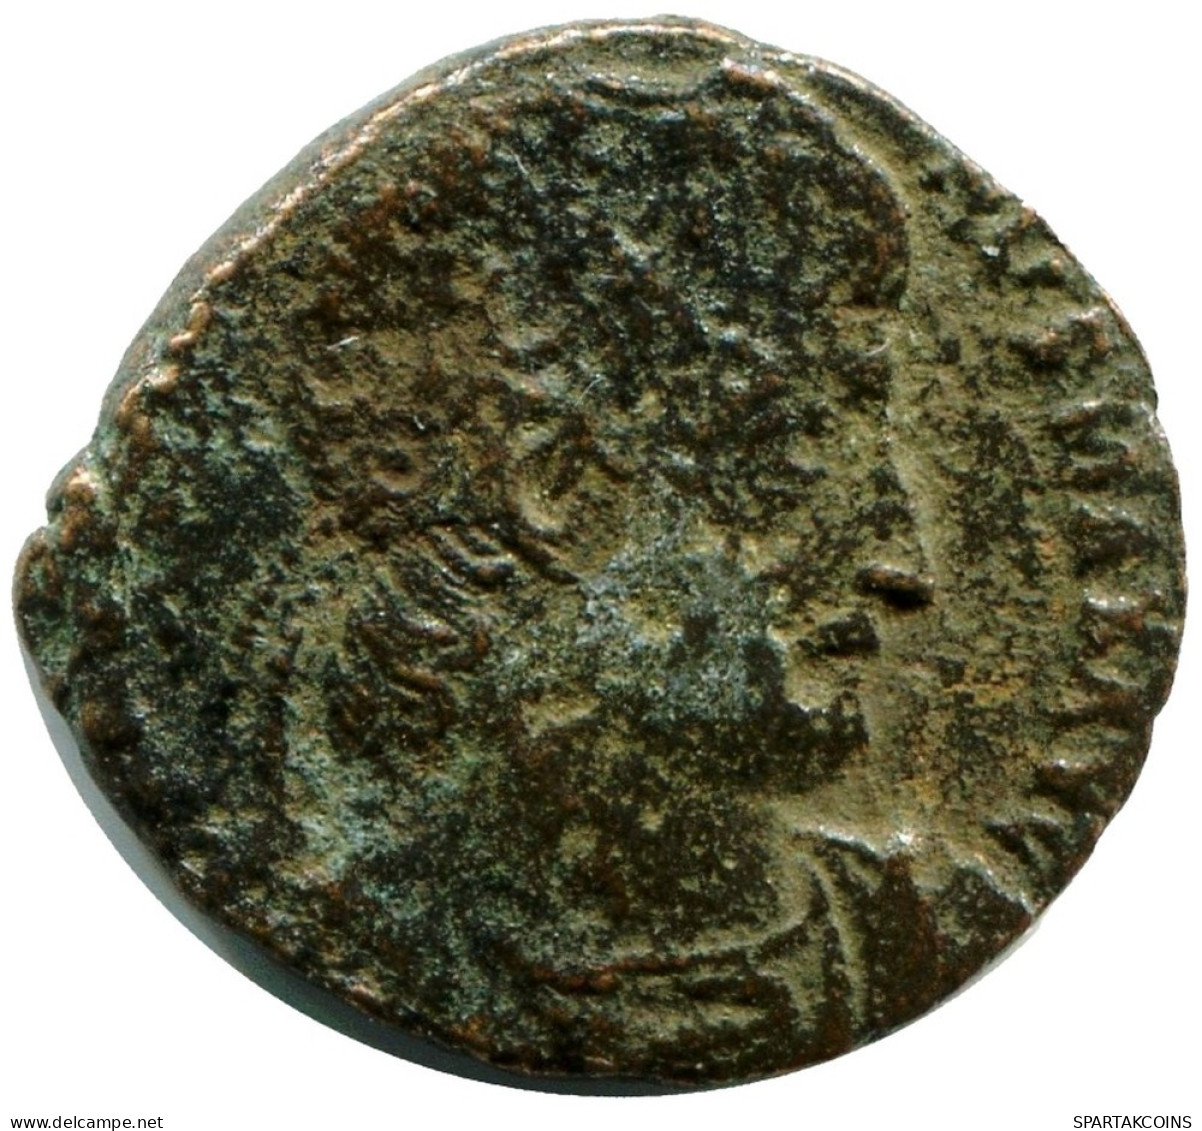 CONSTANTINE I MINTED IN ROME ITALY FROM THE ROYAL ONTARIO MUSEUM #ANC11184.14.D.A - El Imperio Christiano (307 / 363)